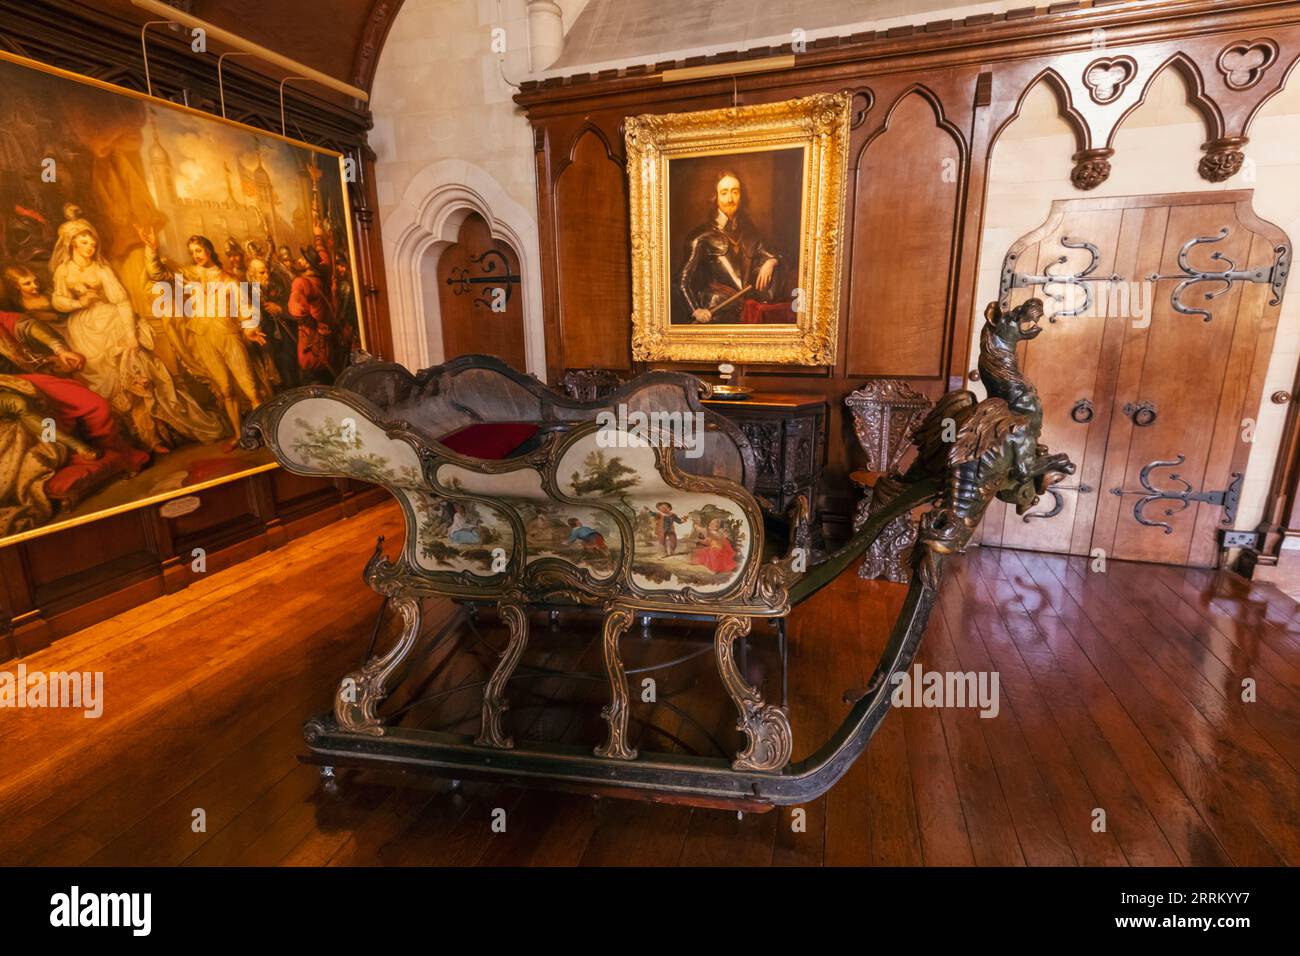 England, Sussex, West Sussex, Arundel, Arundel Castle, The Baron's Hall, Display of Ornate Sleigh Stock Photo